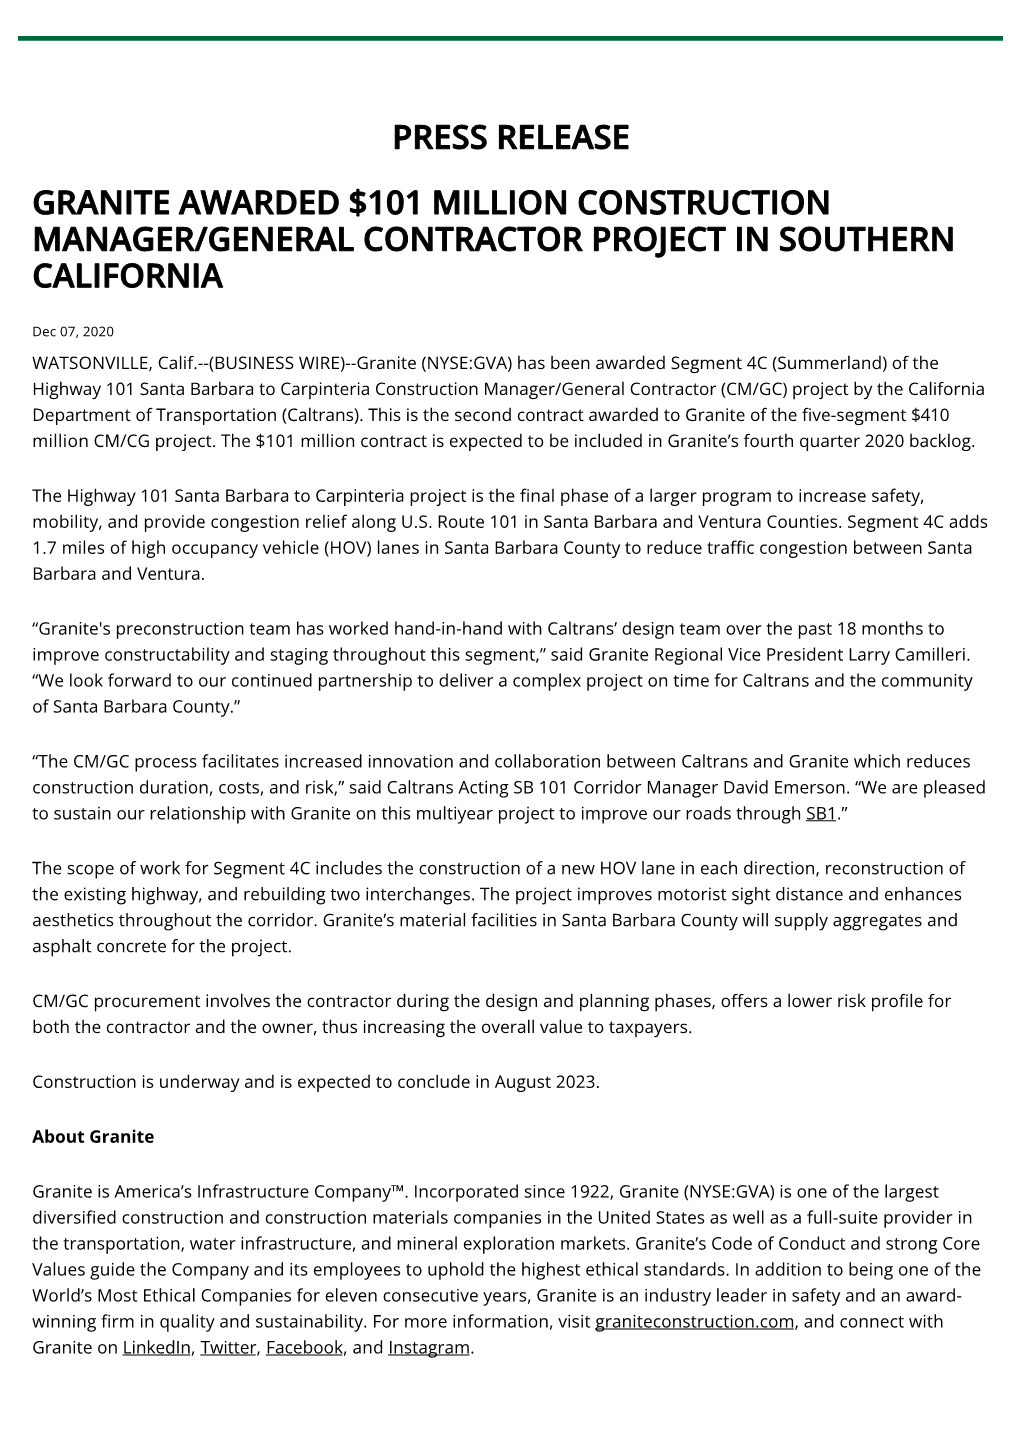 Press Release Granite Awarded $101 Million Construction Manager/General Contractor Project in Southern California